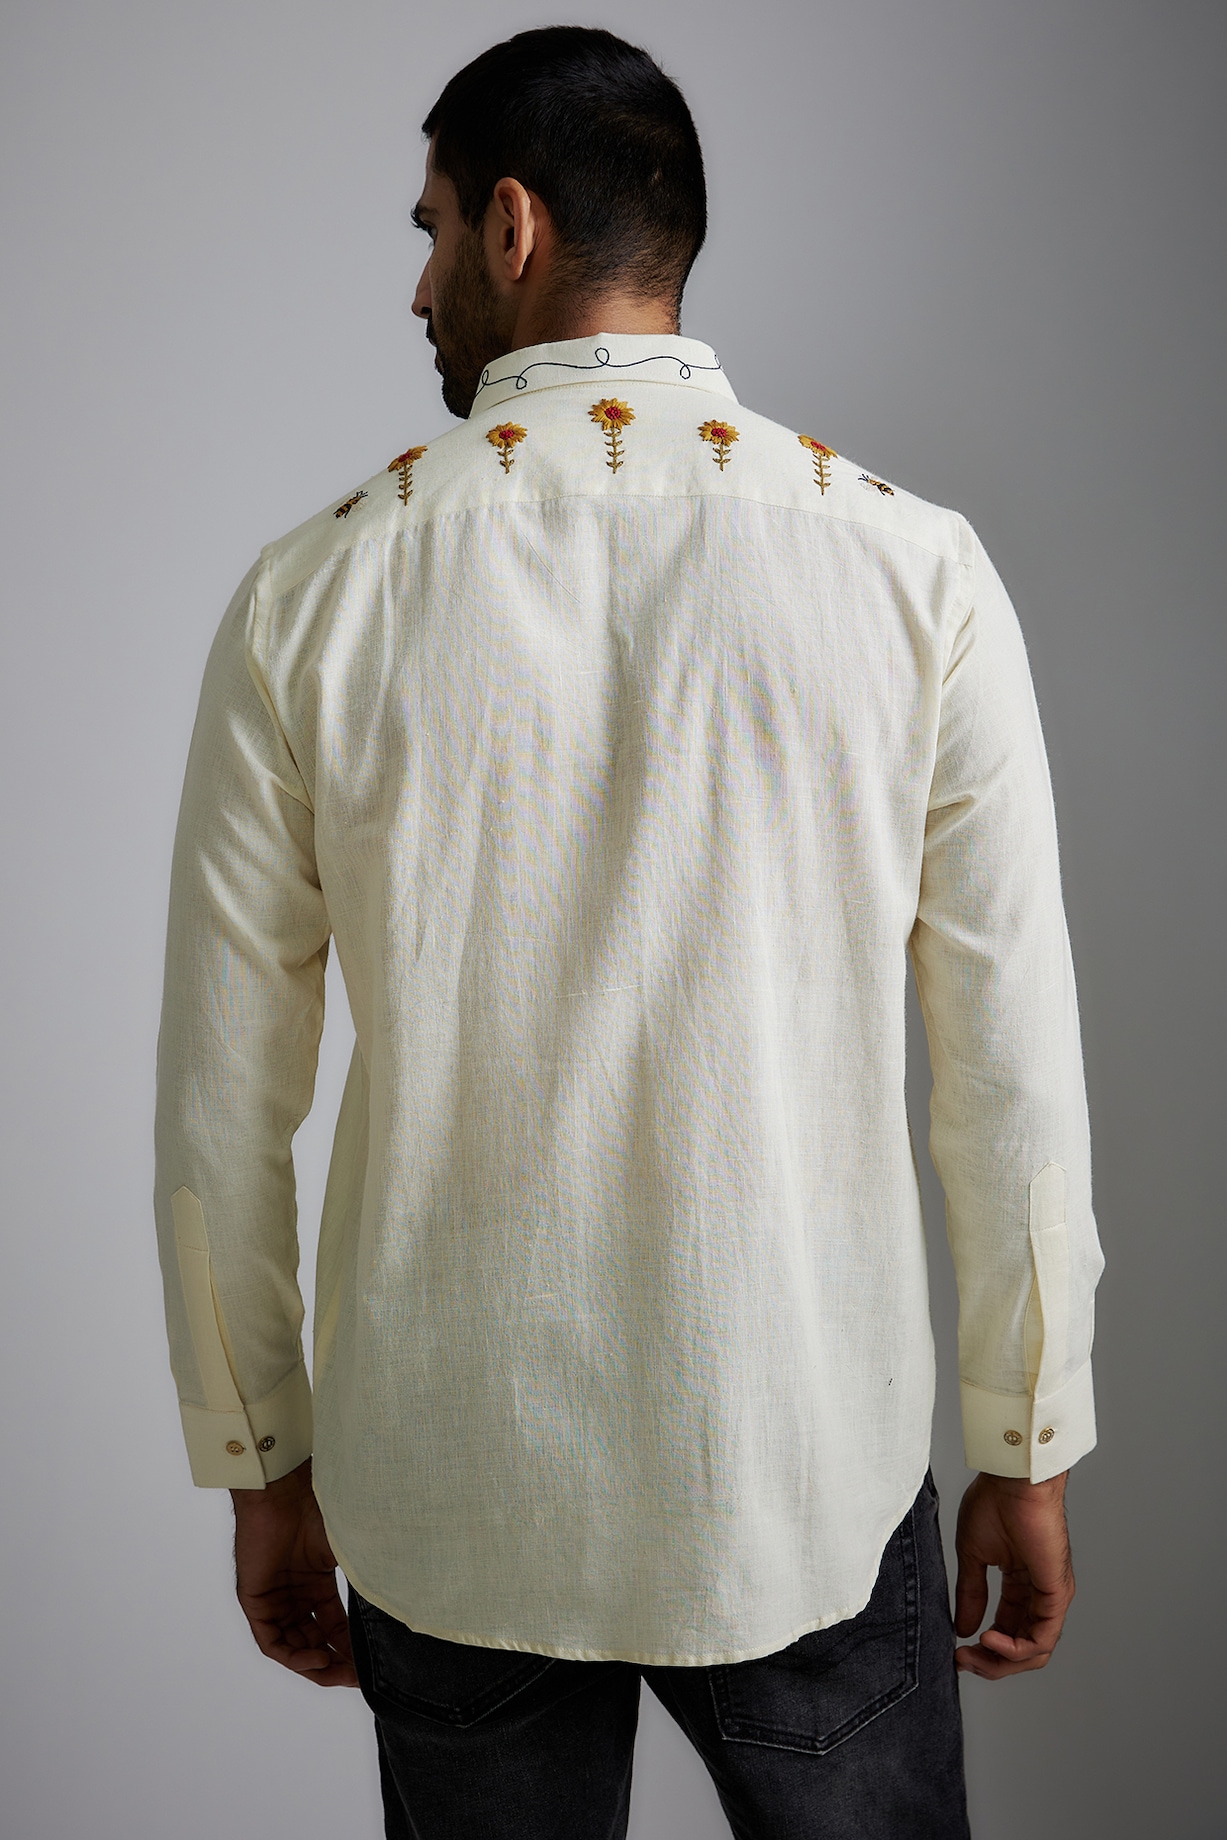 Ivory Handwoven Cotton Embroidered Shirt by VAANI BESWAL MEN